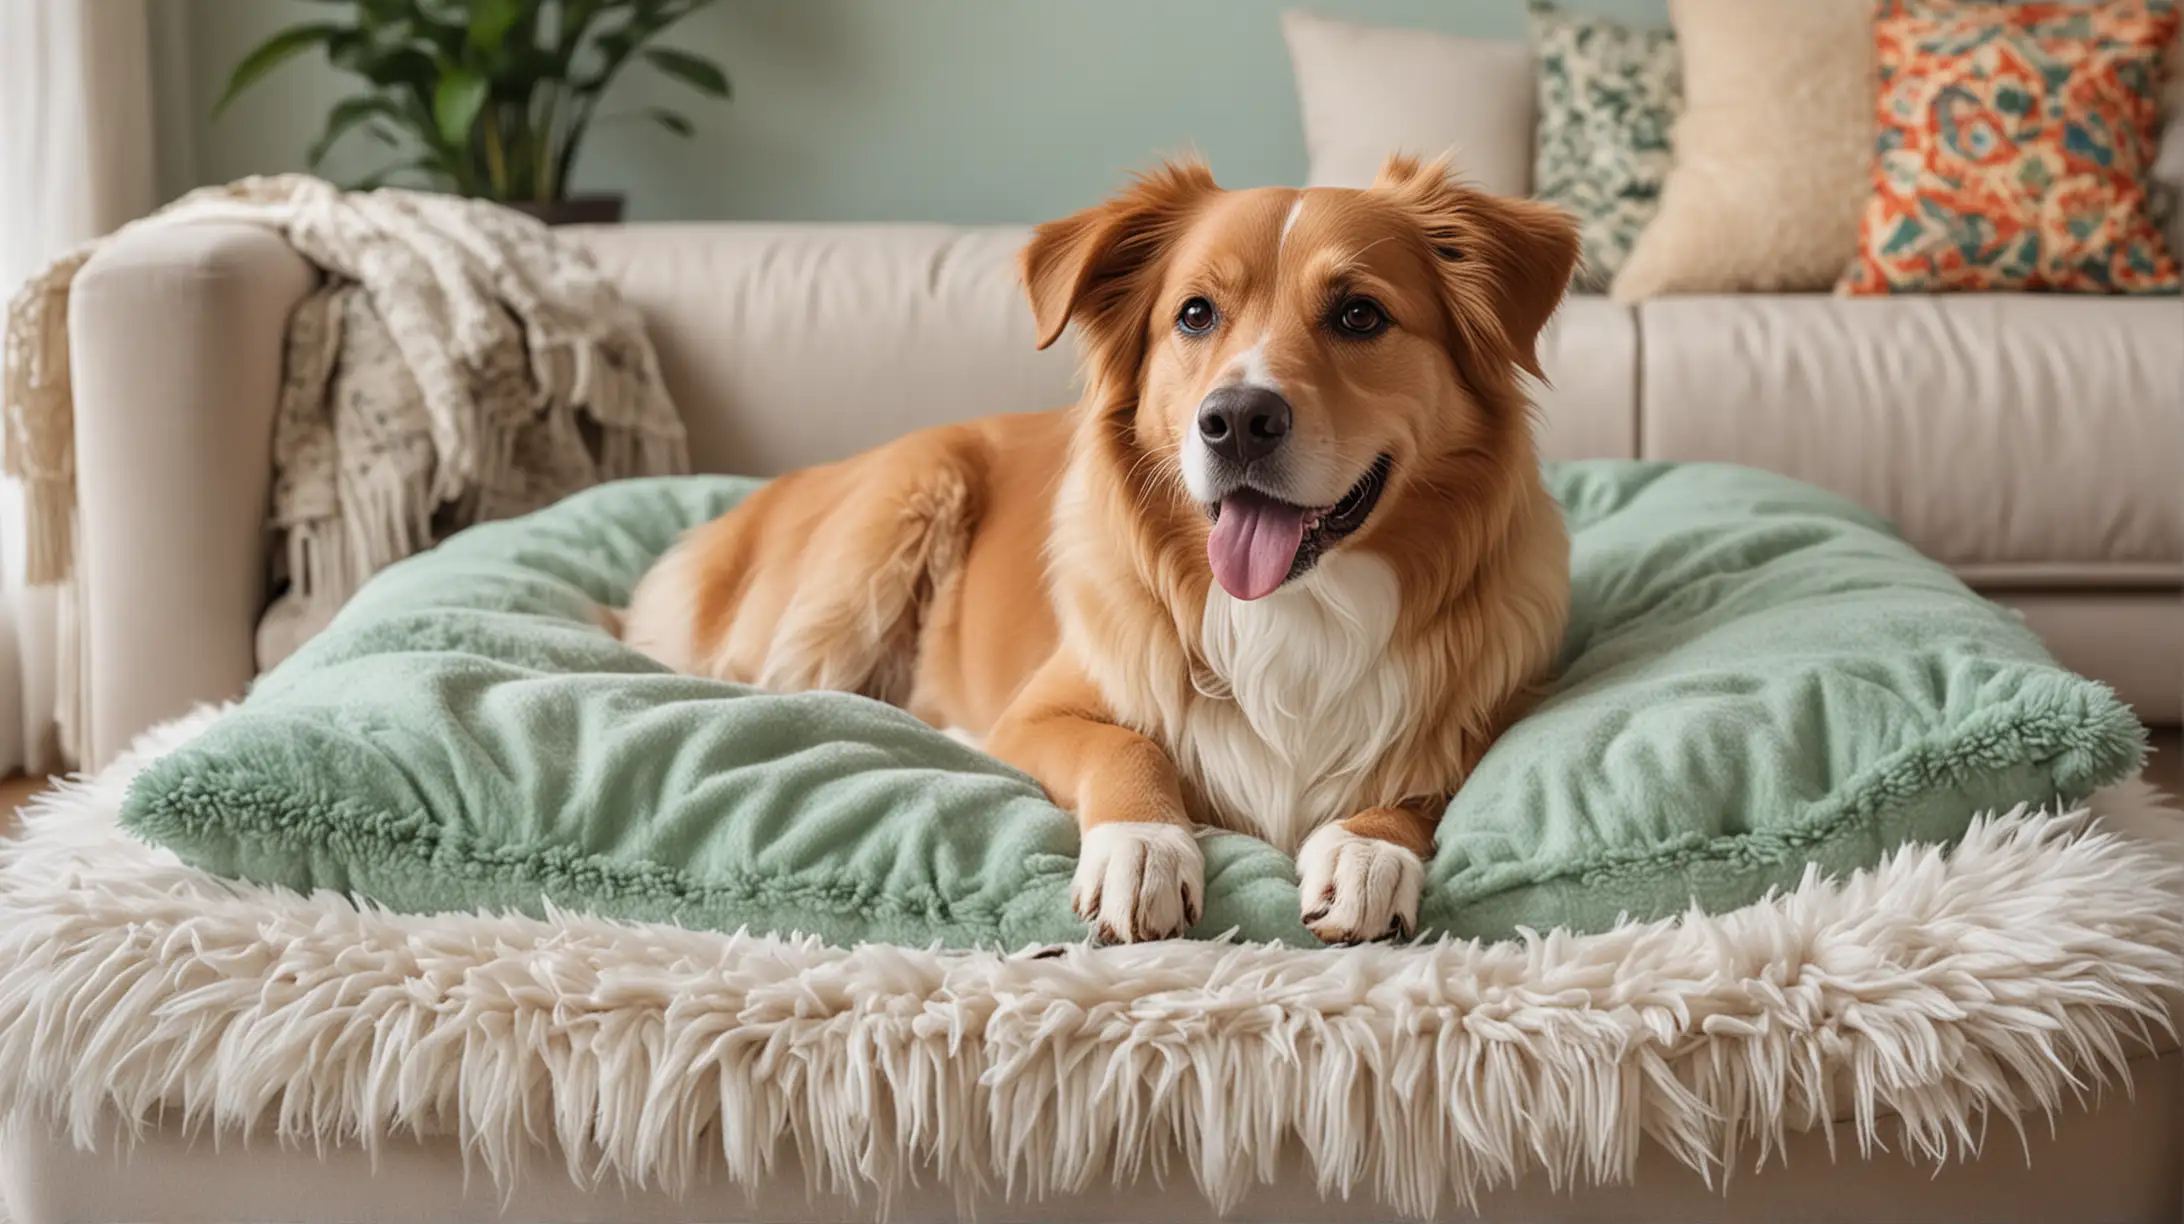 Happy Dog Relaxing on Cozy Bed in Luxurious Home Setting